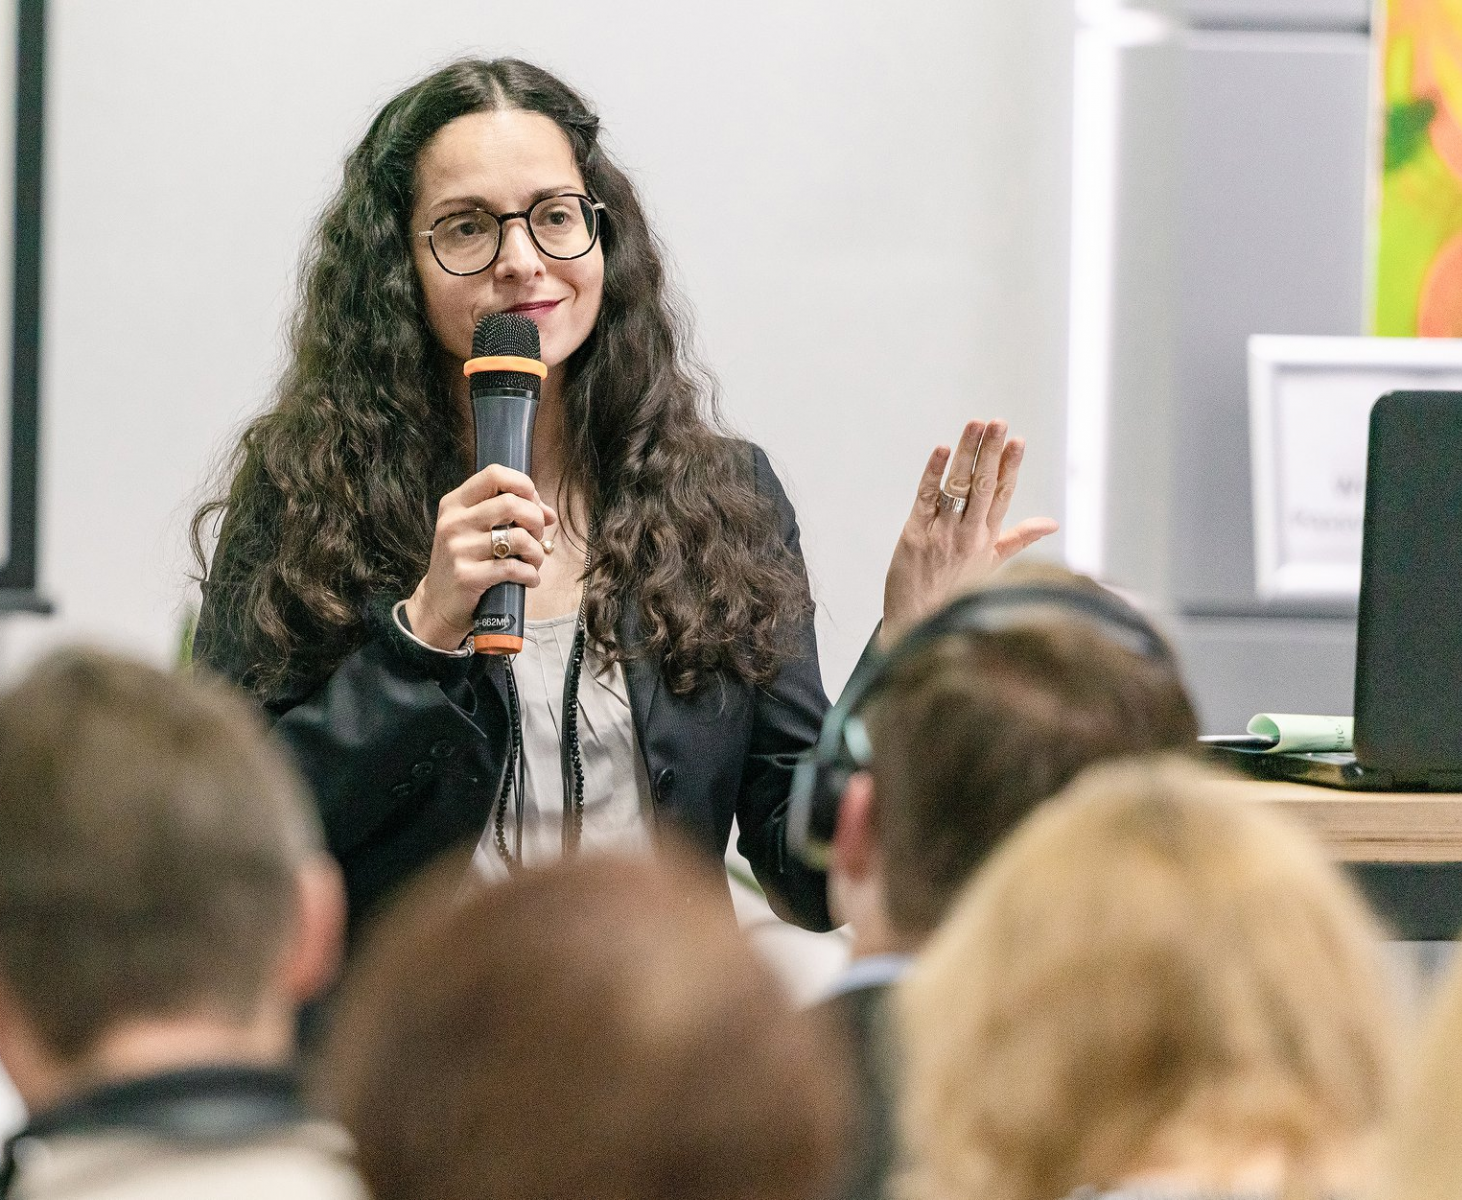 Present Past Forum. Processing the Past to Shape the Future  - 14 June 2019, Kyiv.